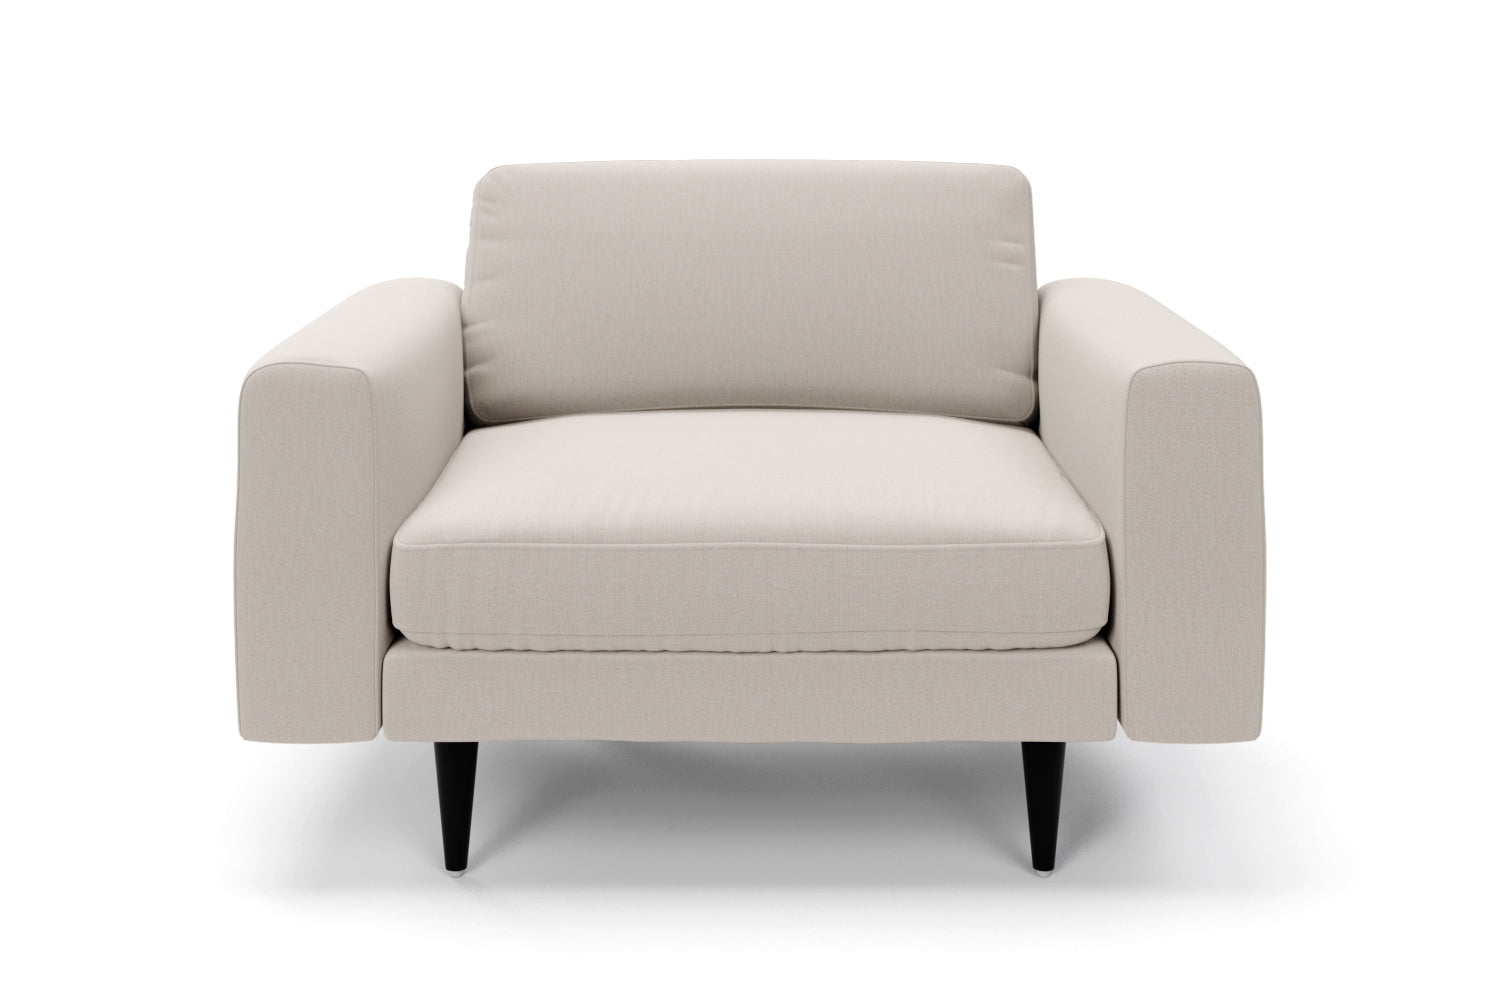 SNUG | The Big Chill 1.5 Seater Snuggler in Biscuit variant_40520424587312